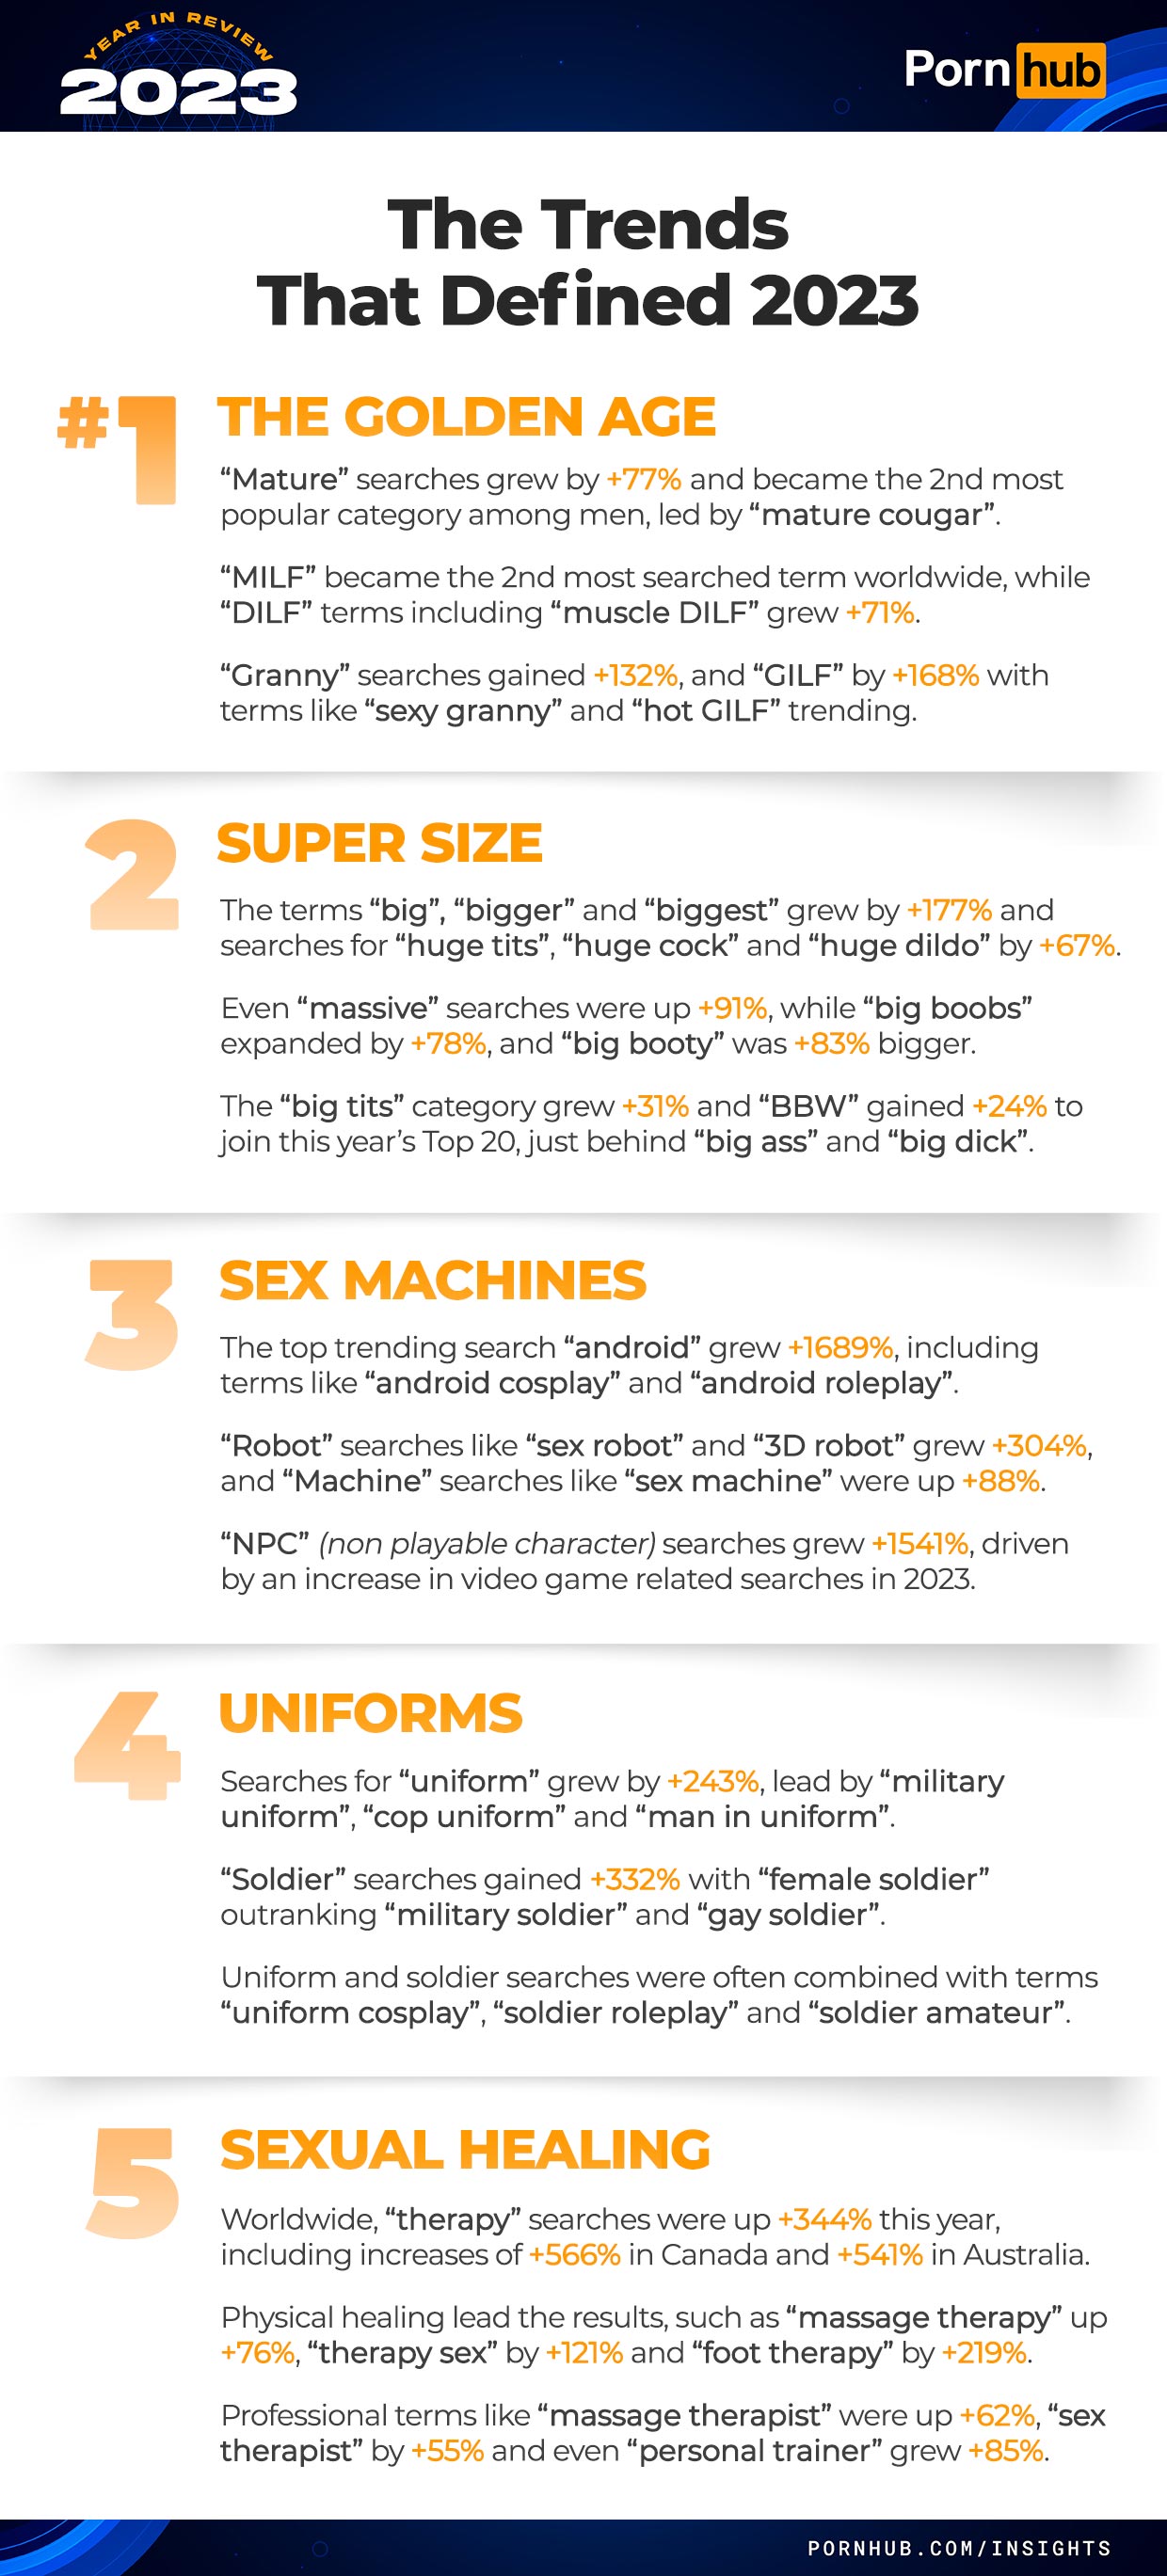 pornhub-insights-2023-year-in-review-trends-that-defined-2023.jpg